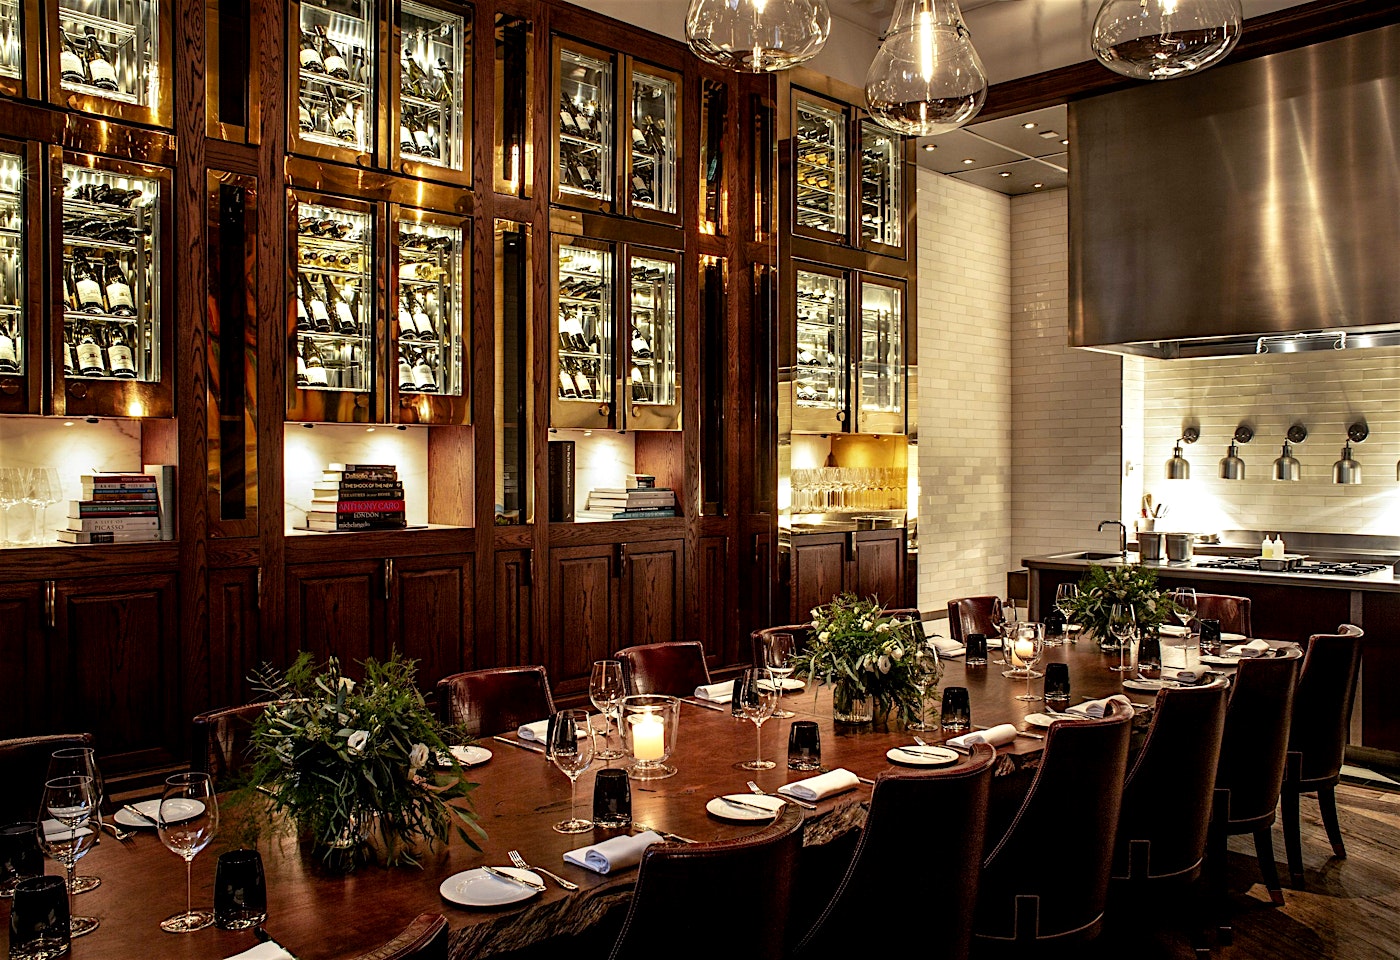 kerridges bar and grill westminster private dining london